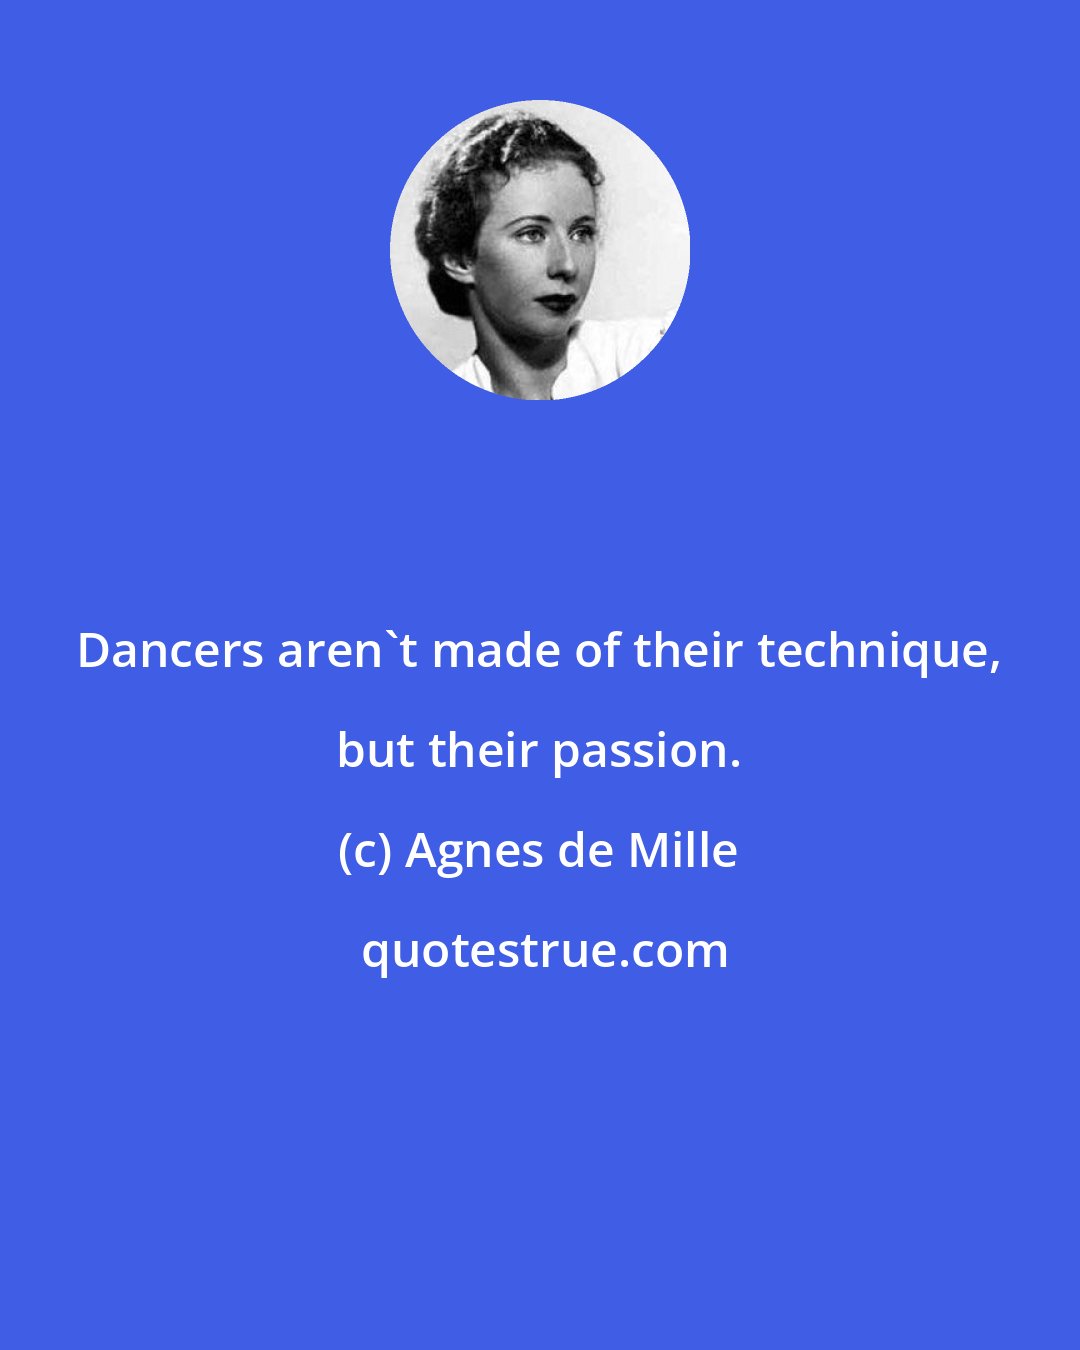 Agnes de Mille: Dancers aren't made of their technique, but their passion.